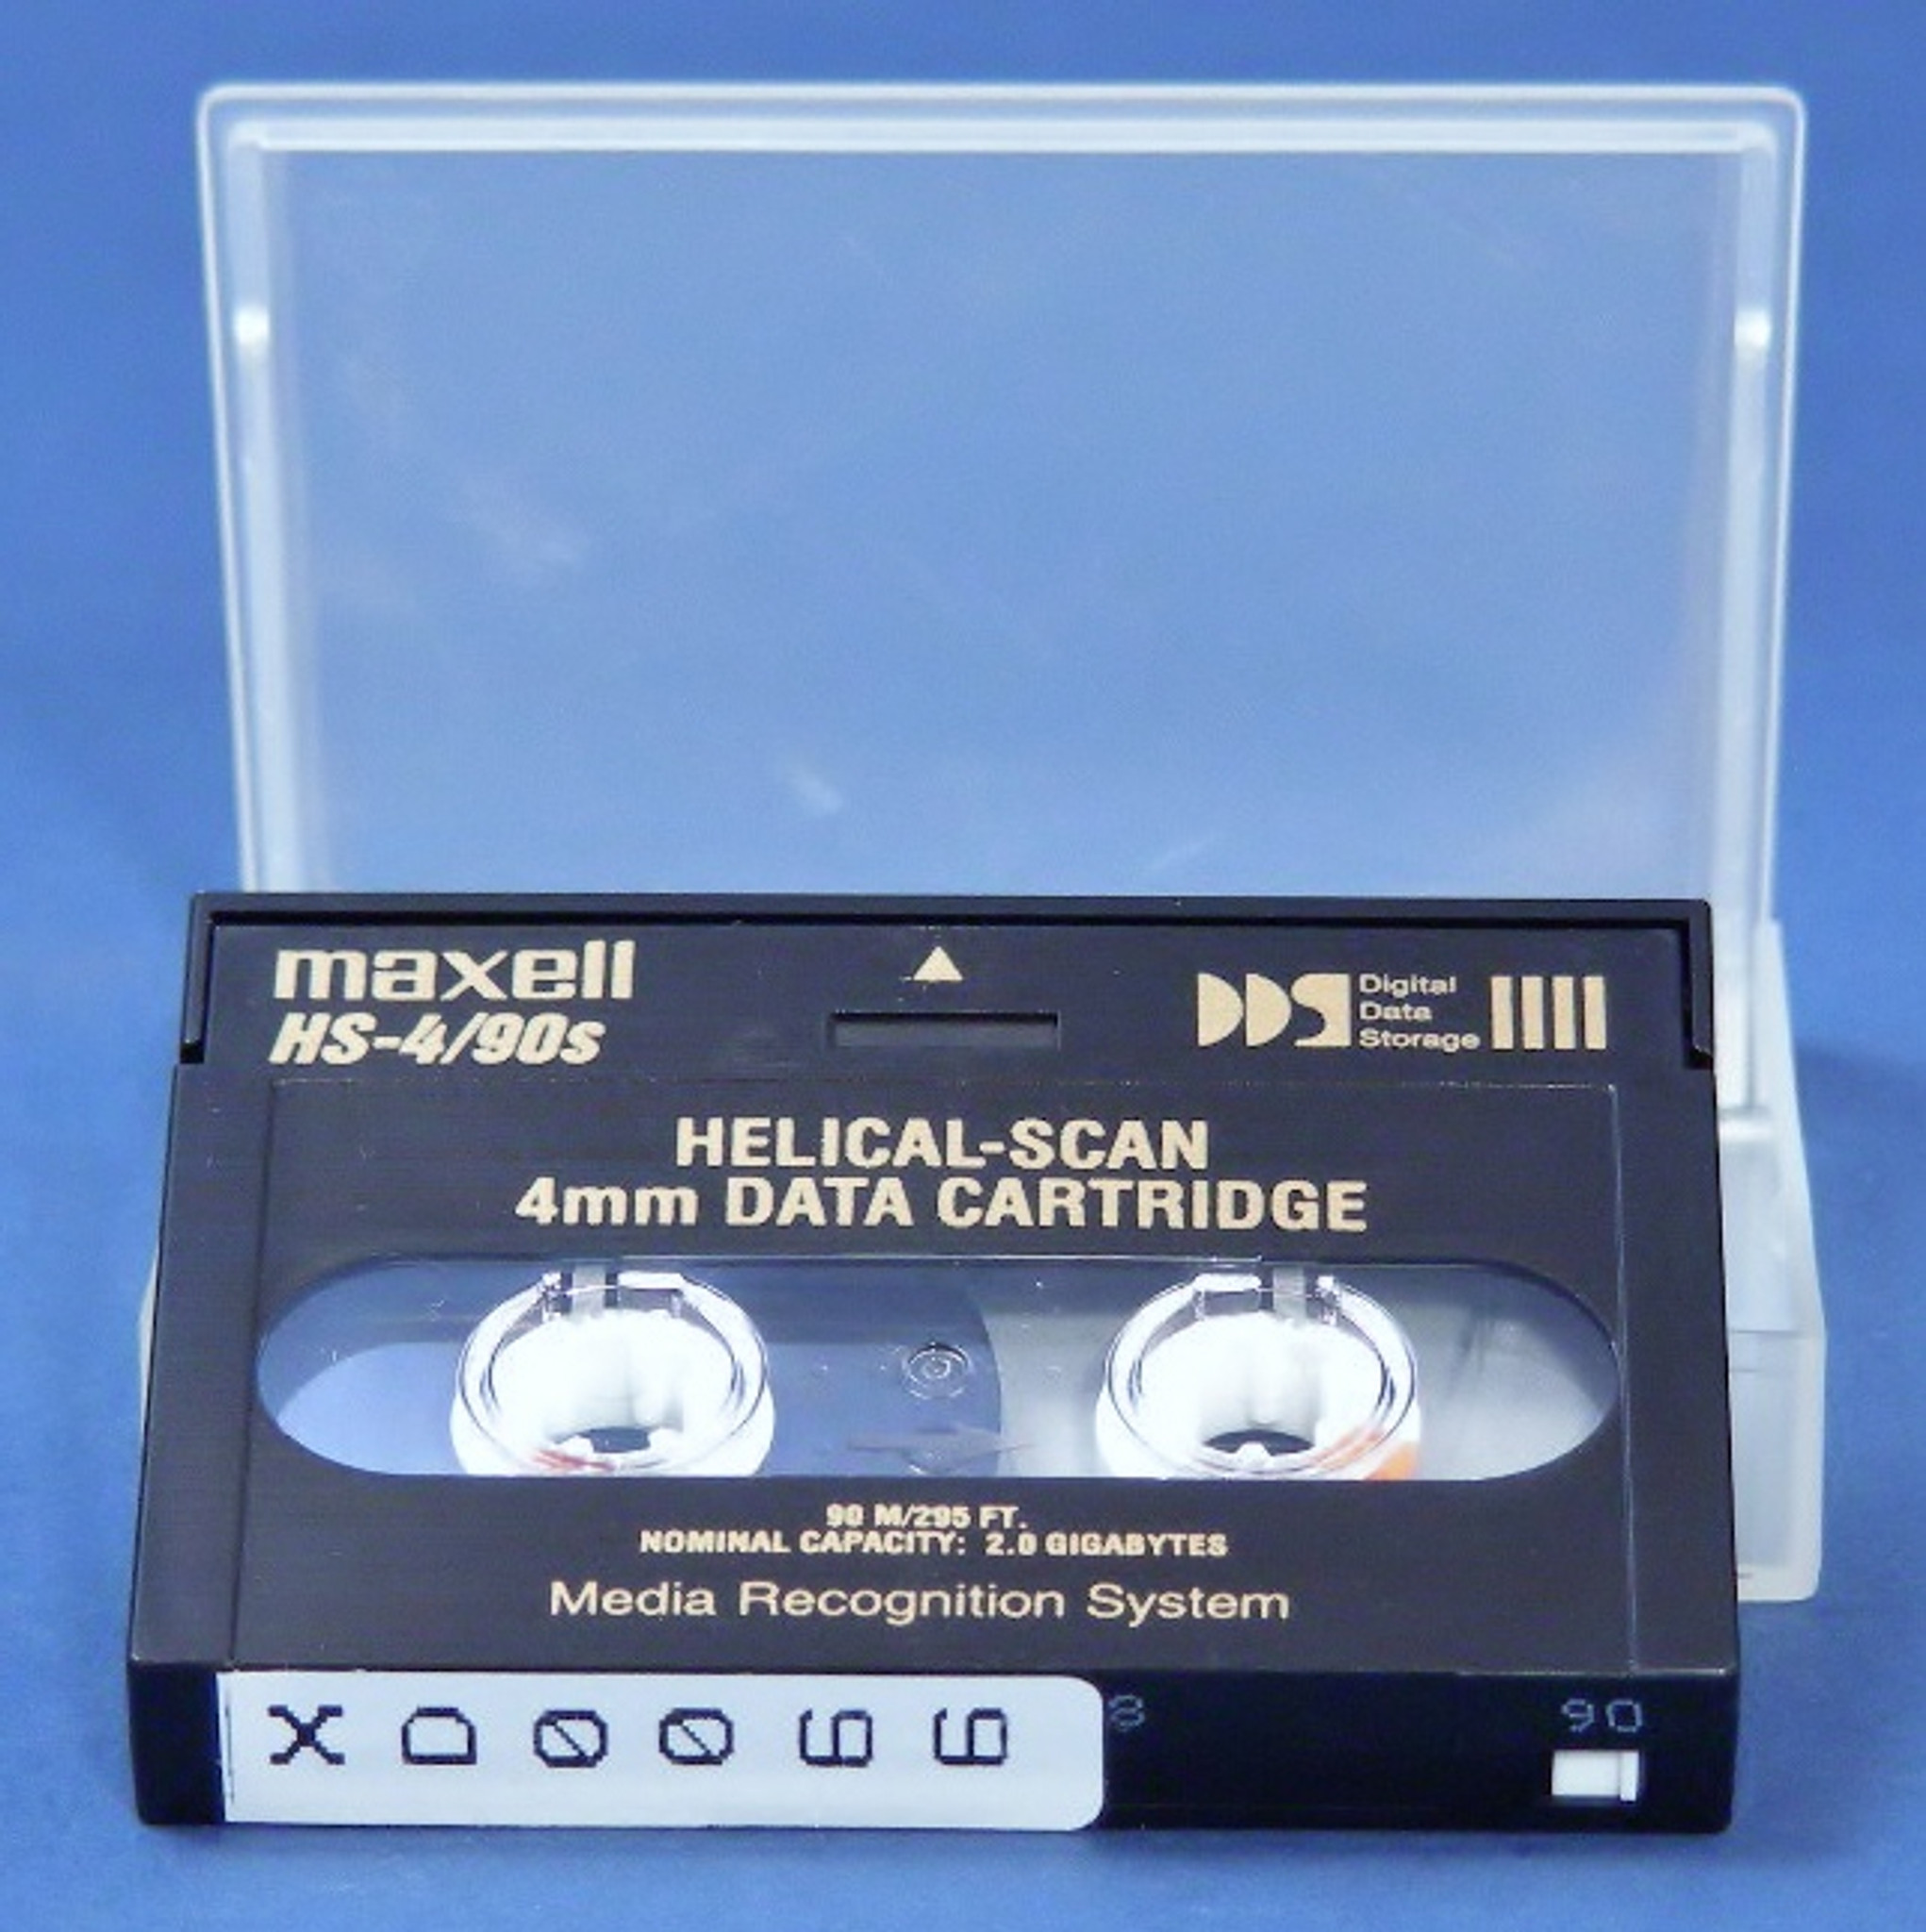 MAXELL HS-4/90S Helical- Scan 4mm Data Tape Cartridges Digital